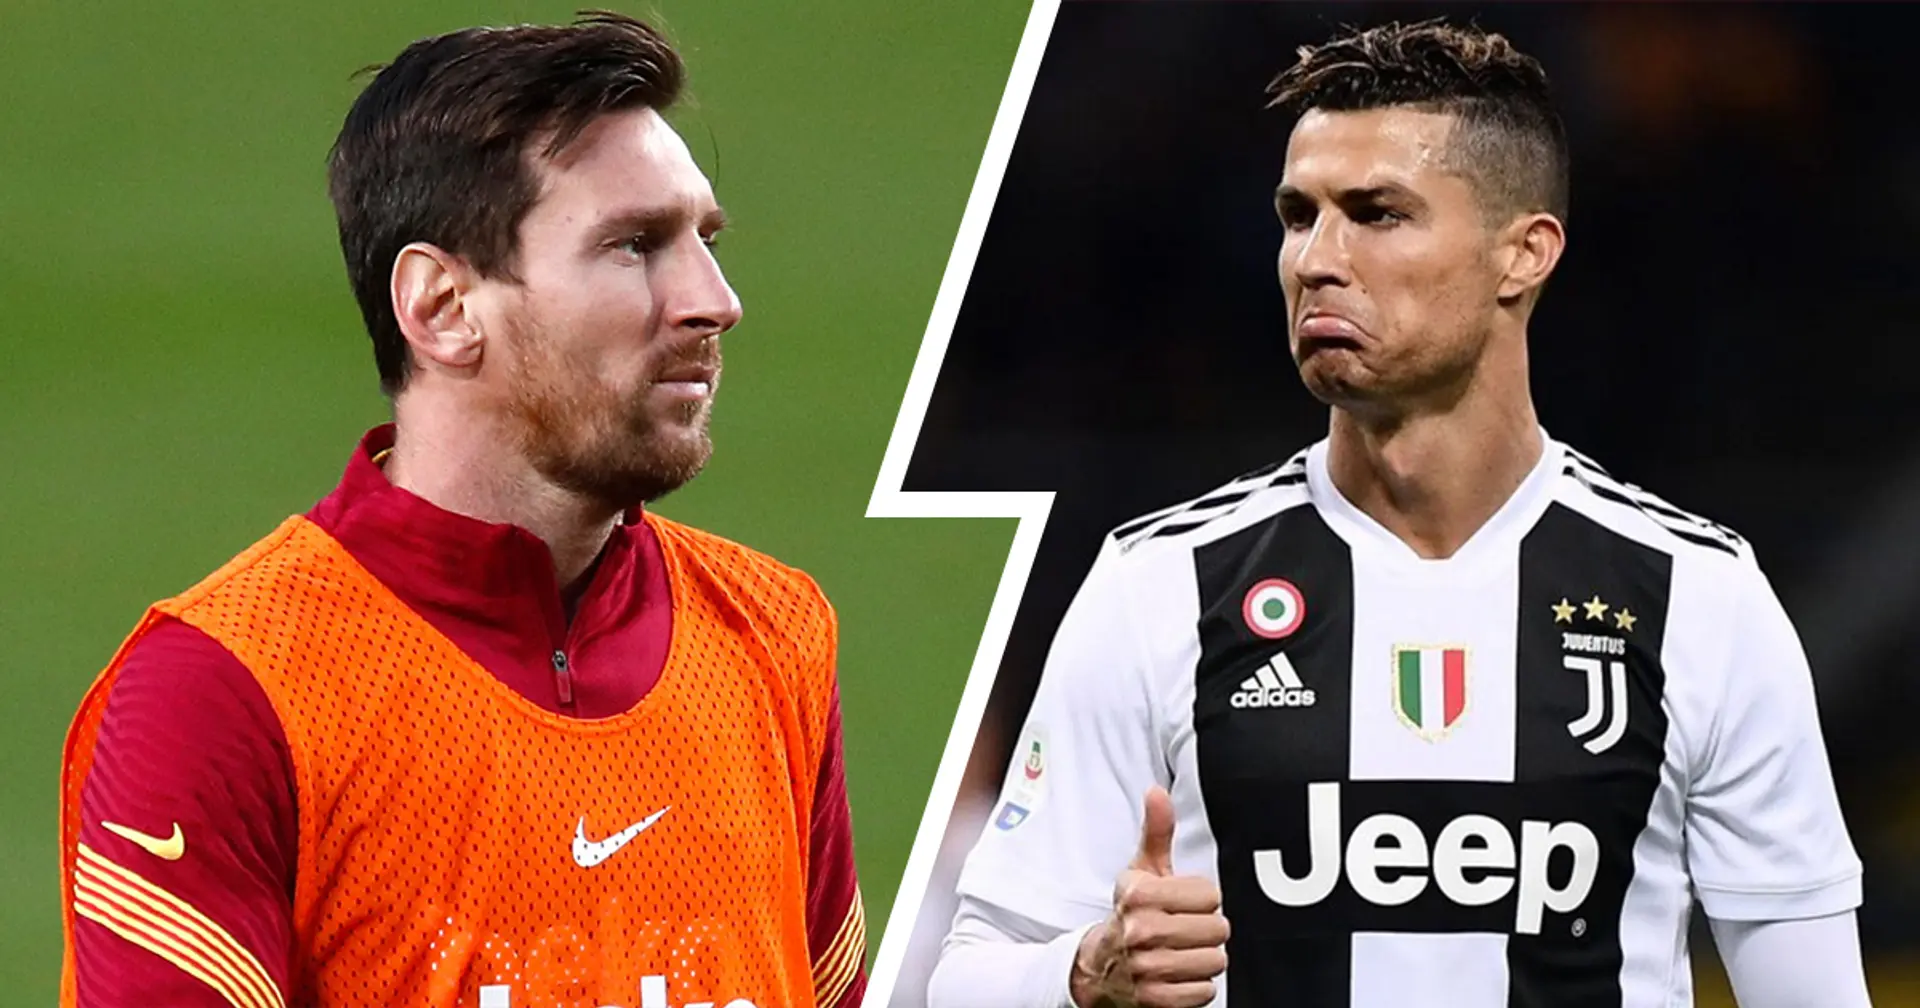 'I hoped Messi would go to Juventus, so that we could see him and Cristiano together': Ex-Atletico star Futre